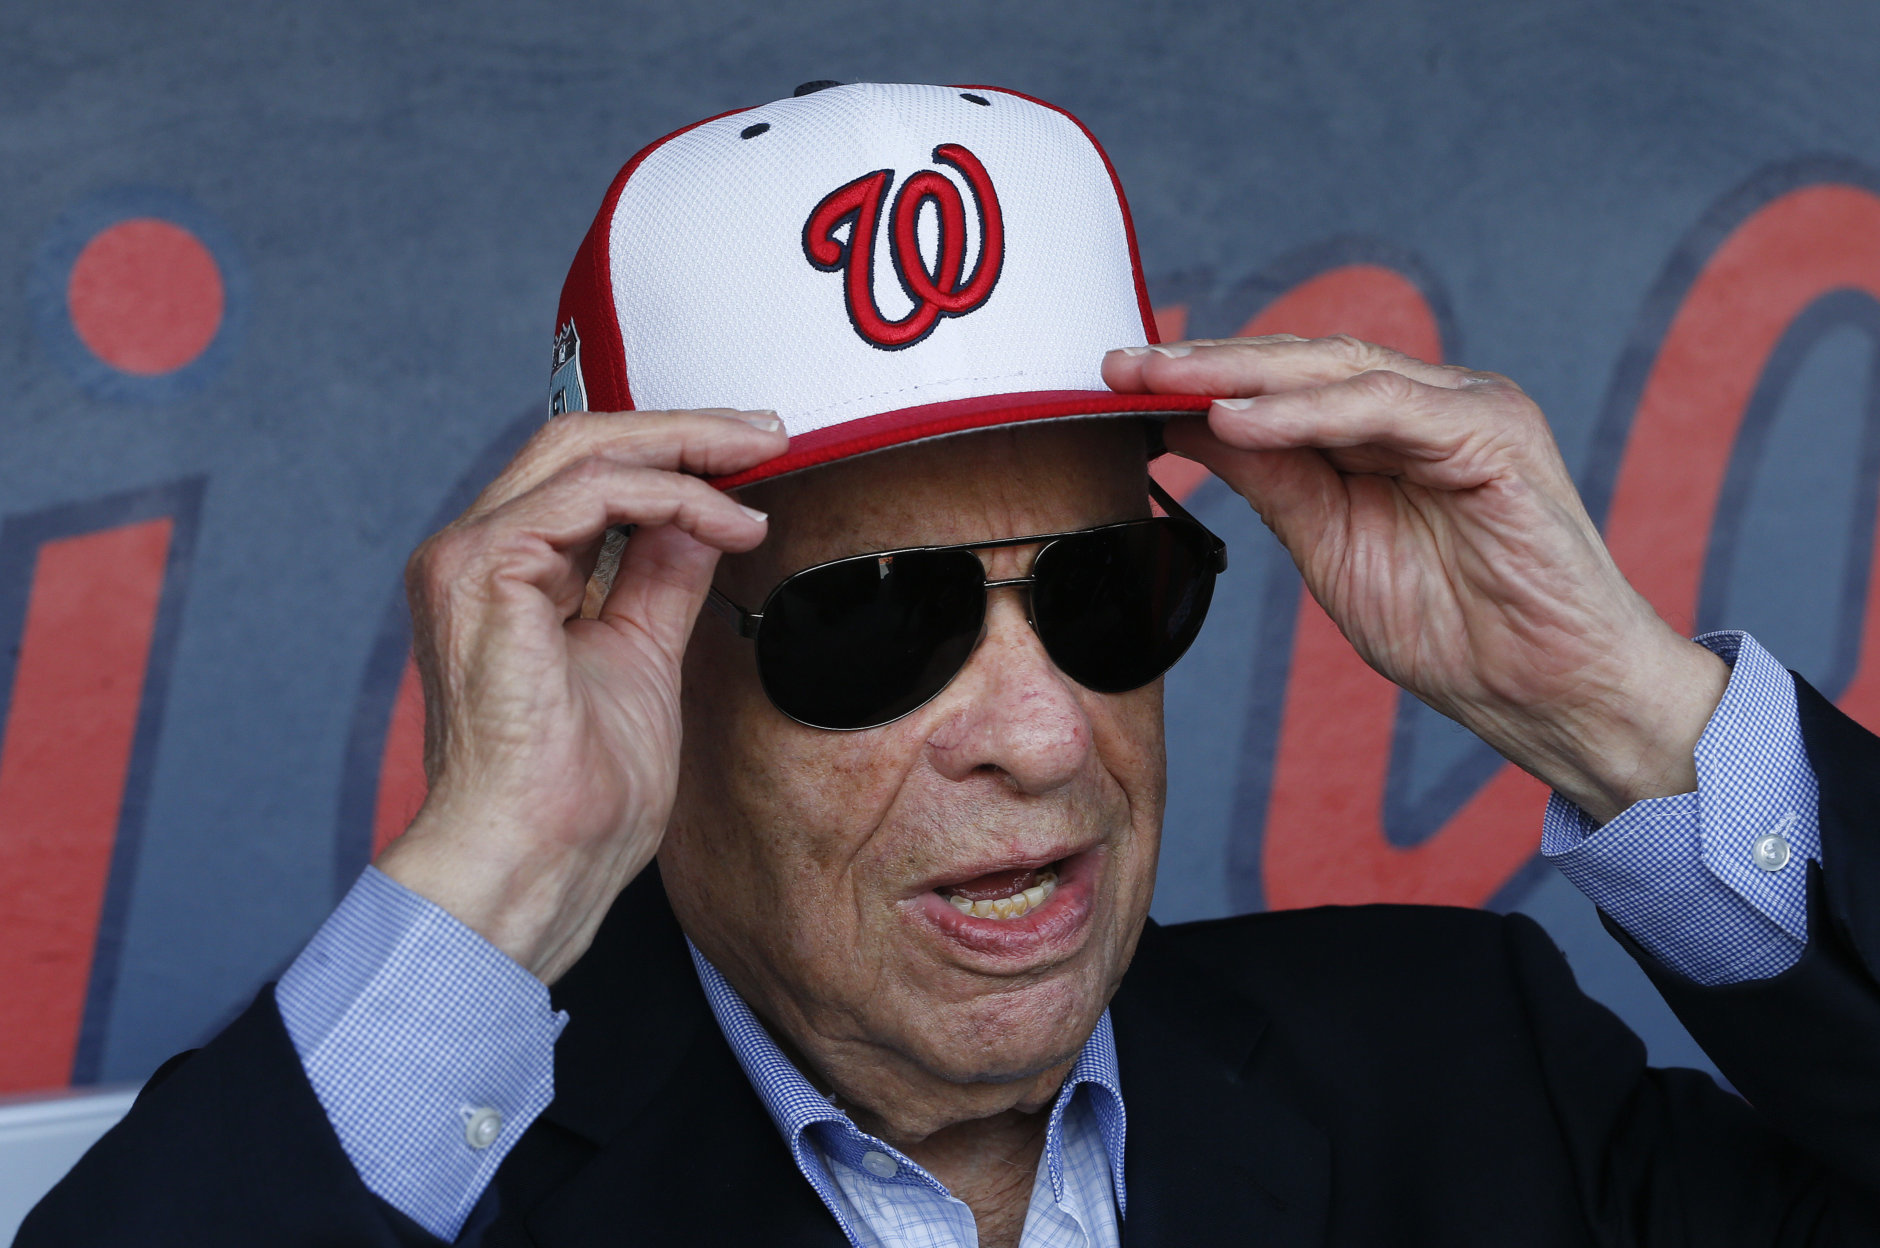 Washington Nationals owner Ted Lerner tries on a baseball cap before a ribbon cutting ceremony to open The Ballpark of the Palm beaches before of a spring training baseball game against the Houston Astros Tuesday, Feb. 28, 2017 in West Palm Beach, Fla. The stadium will serve as spring home for both Washington Nationals and Houston Astros. (AP Photo/John Bazemore)